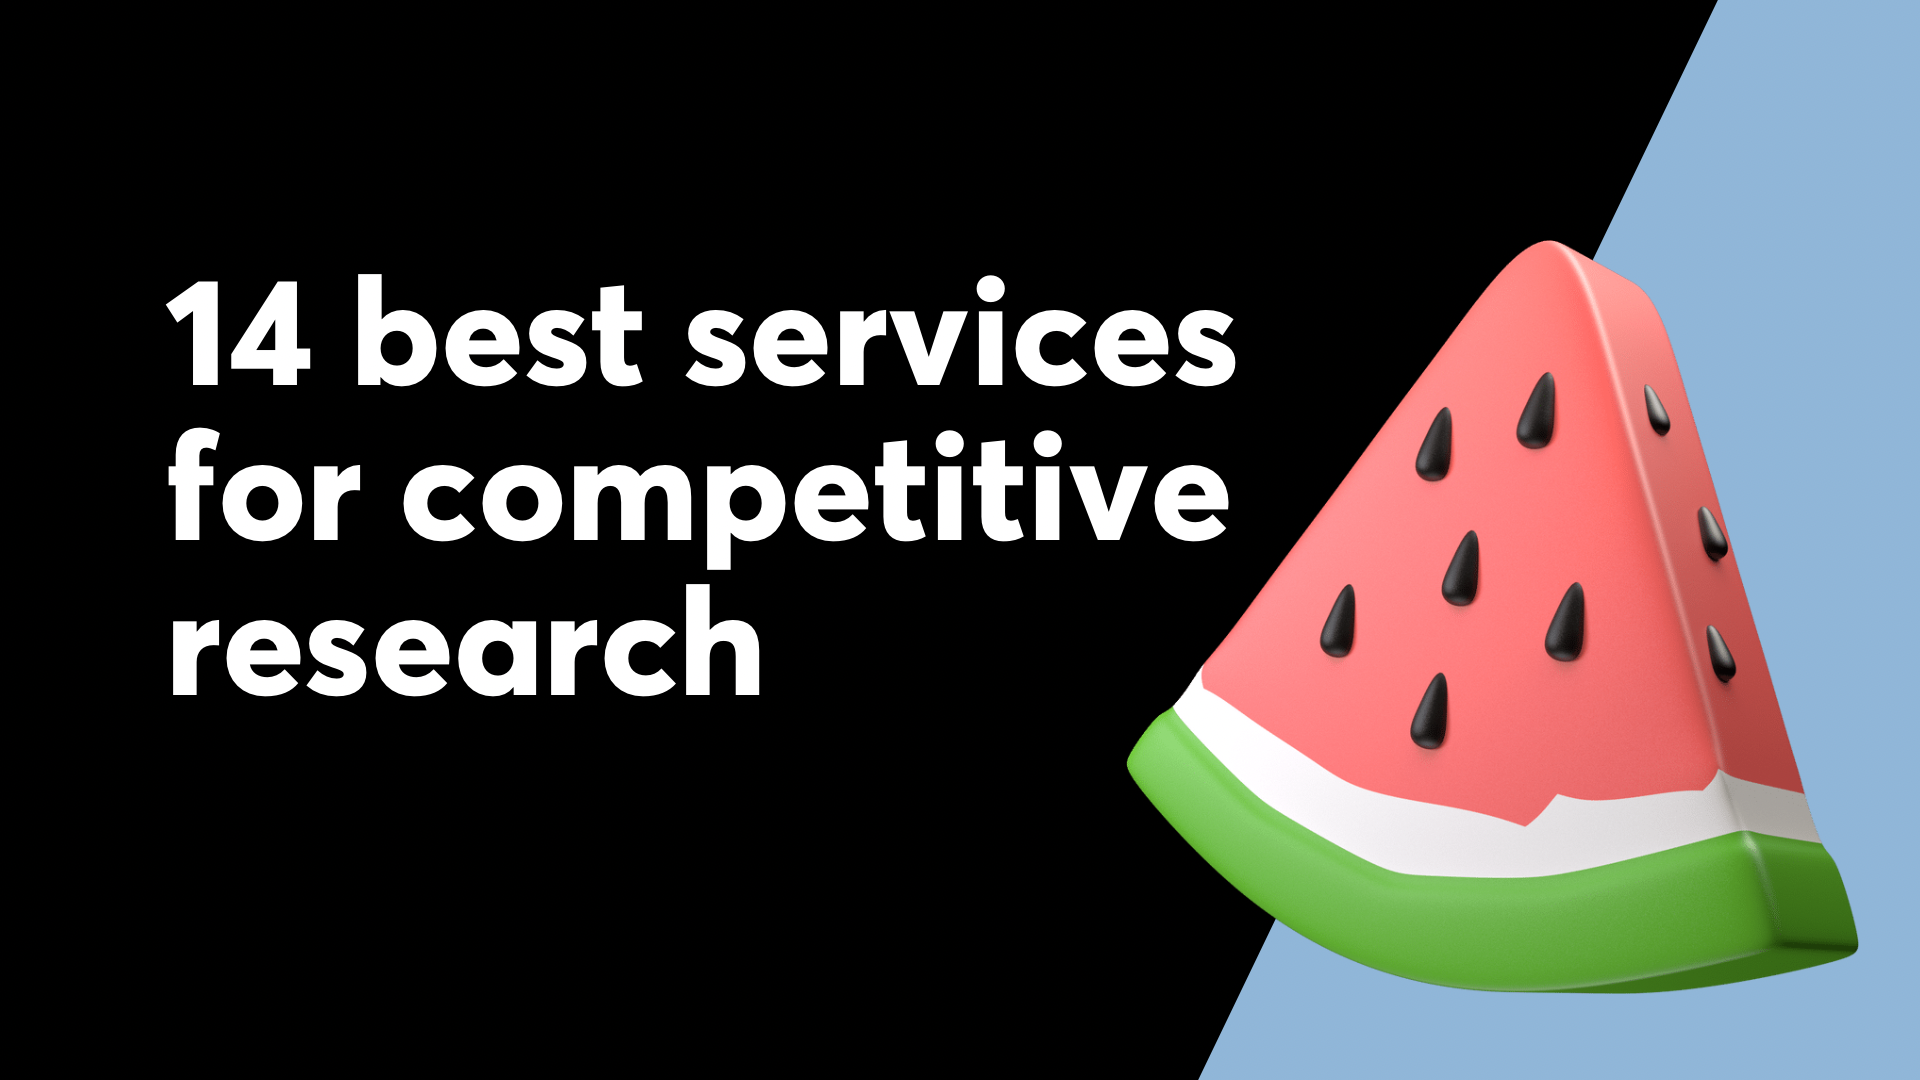 Marketer’s ultimate guide to researching competitors: 14 best services for competitive intelligence